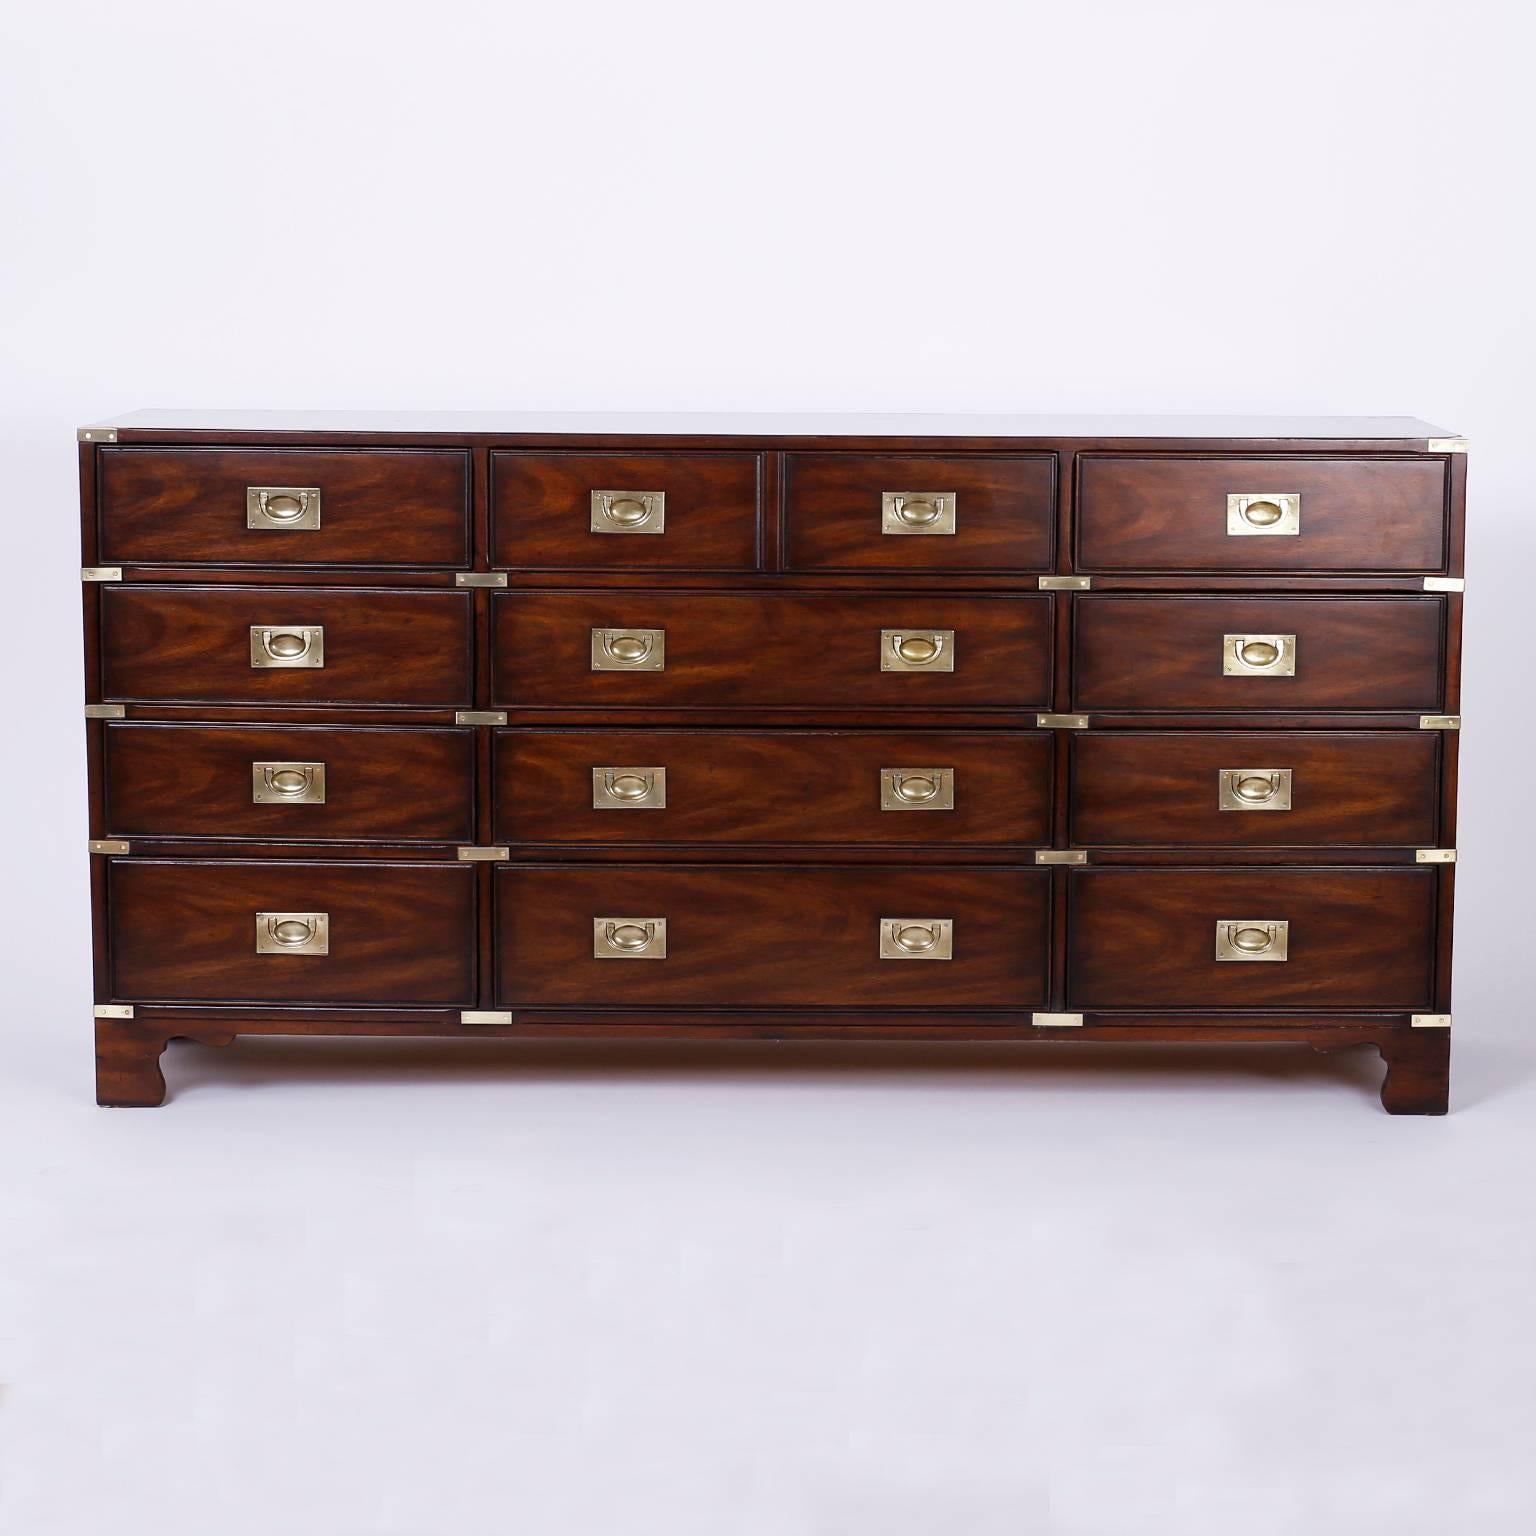 Handsome and unusual 12-drawer mahogany chest of drawers crafted in the Mid-Century with a simple, yet bold profile, clad with Campaign style brass hardware hand polished and lacquered for easy care. Signed Heritage in drawer.